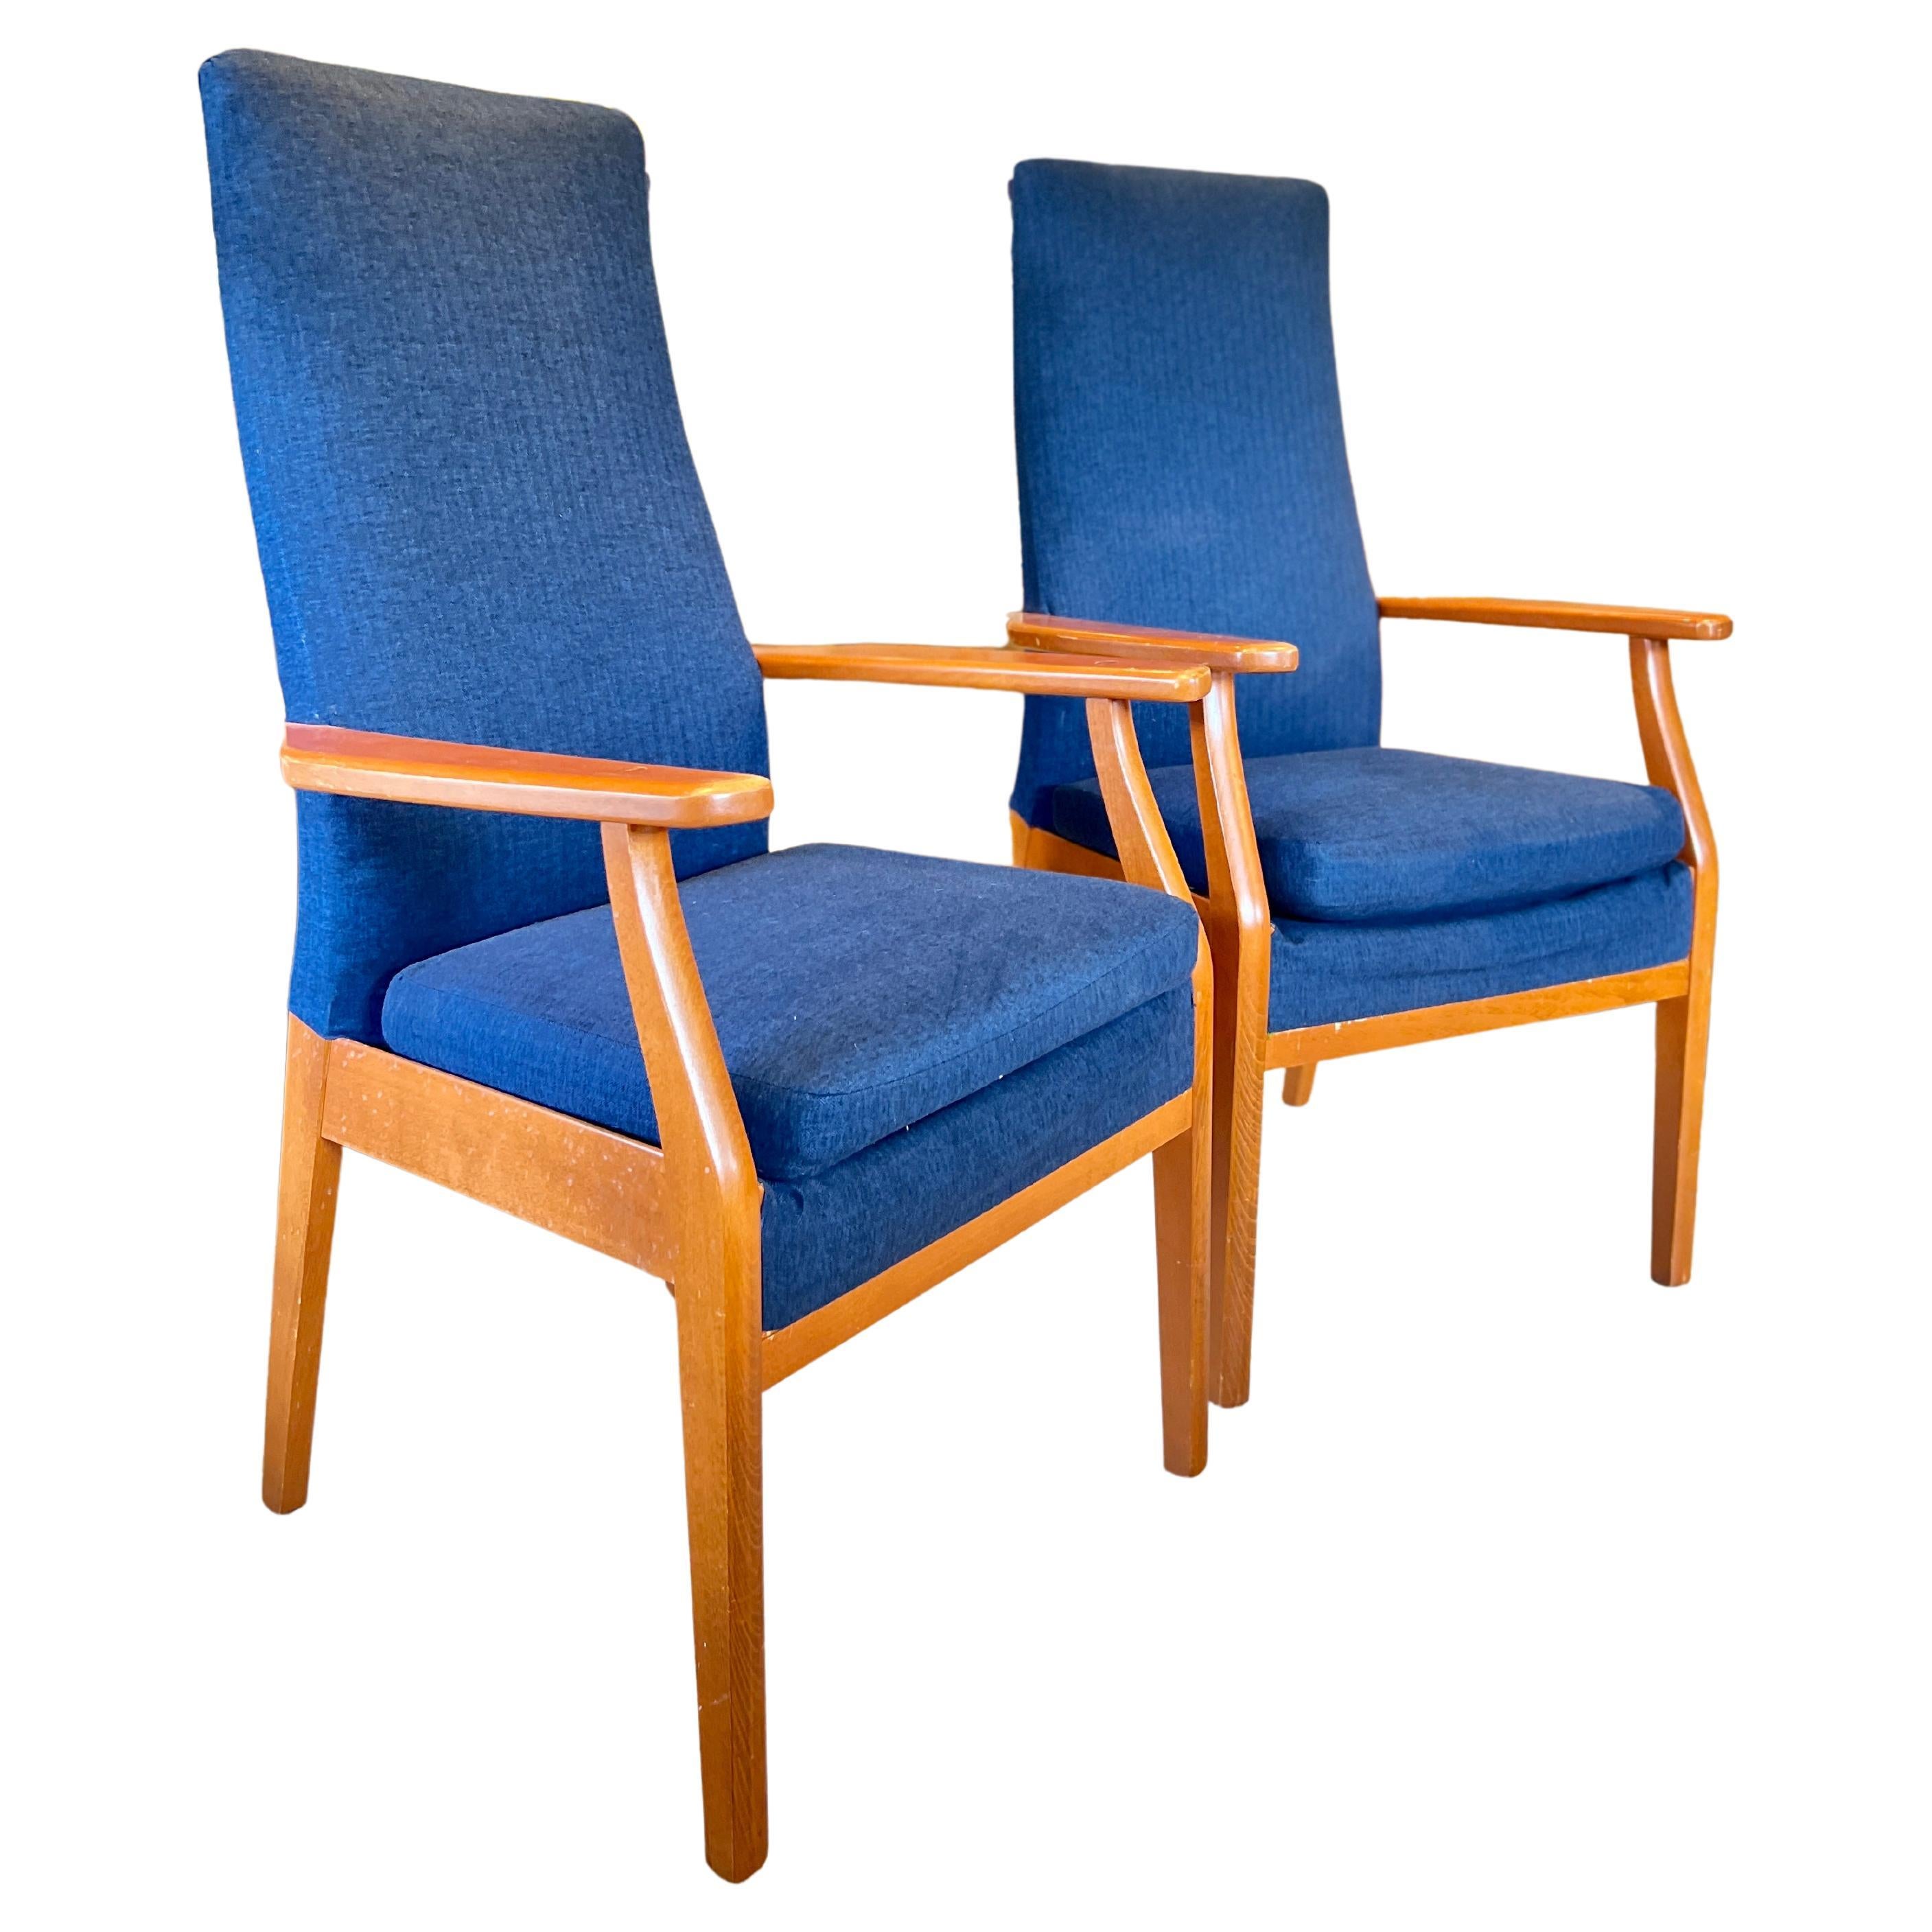 Mid-Century Modern Style High Back Chairs by Parker Knoll from 1981 For Sale